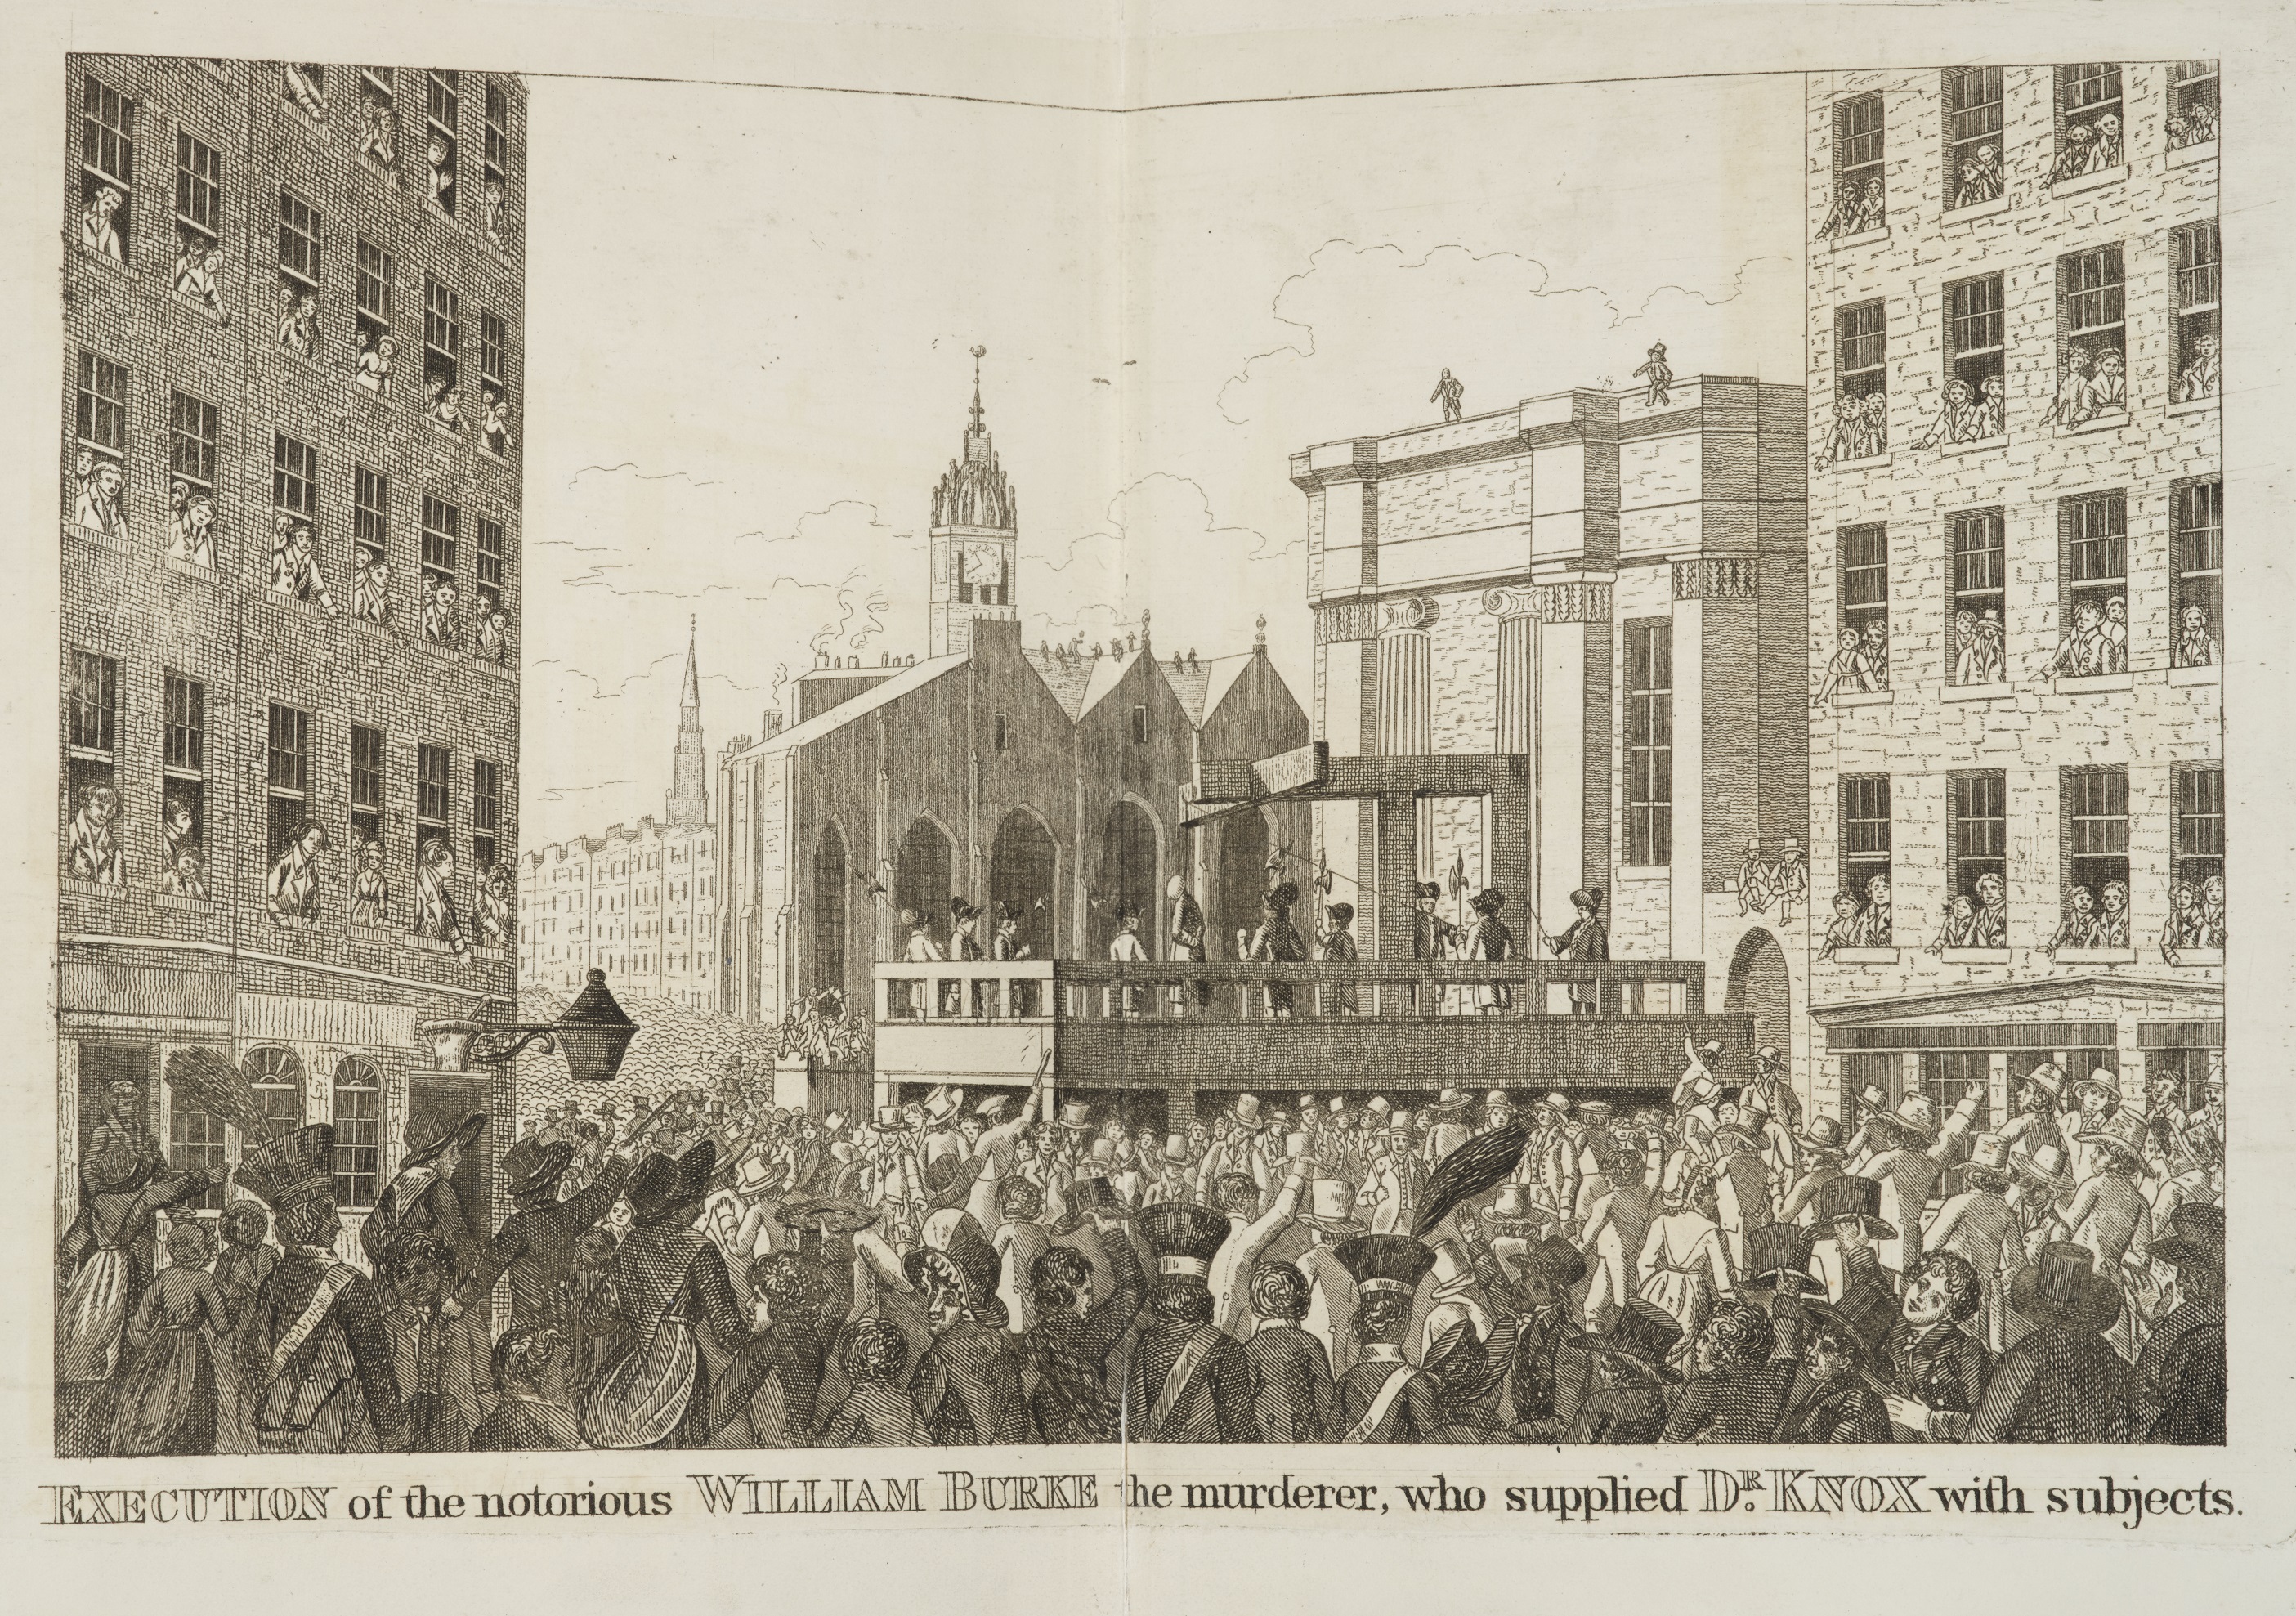 ‘Execution of the notorious William Burke the murderer, who supplied Dr Knox with subjects. A crowd of up to 25,000 people amassed to watch Burke die.